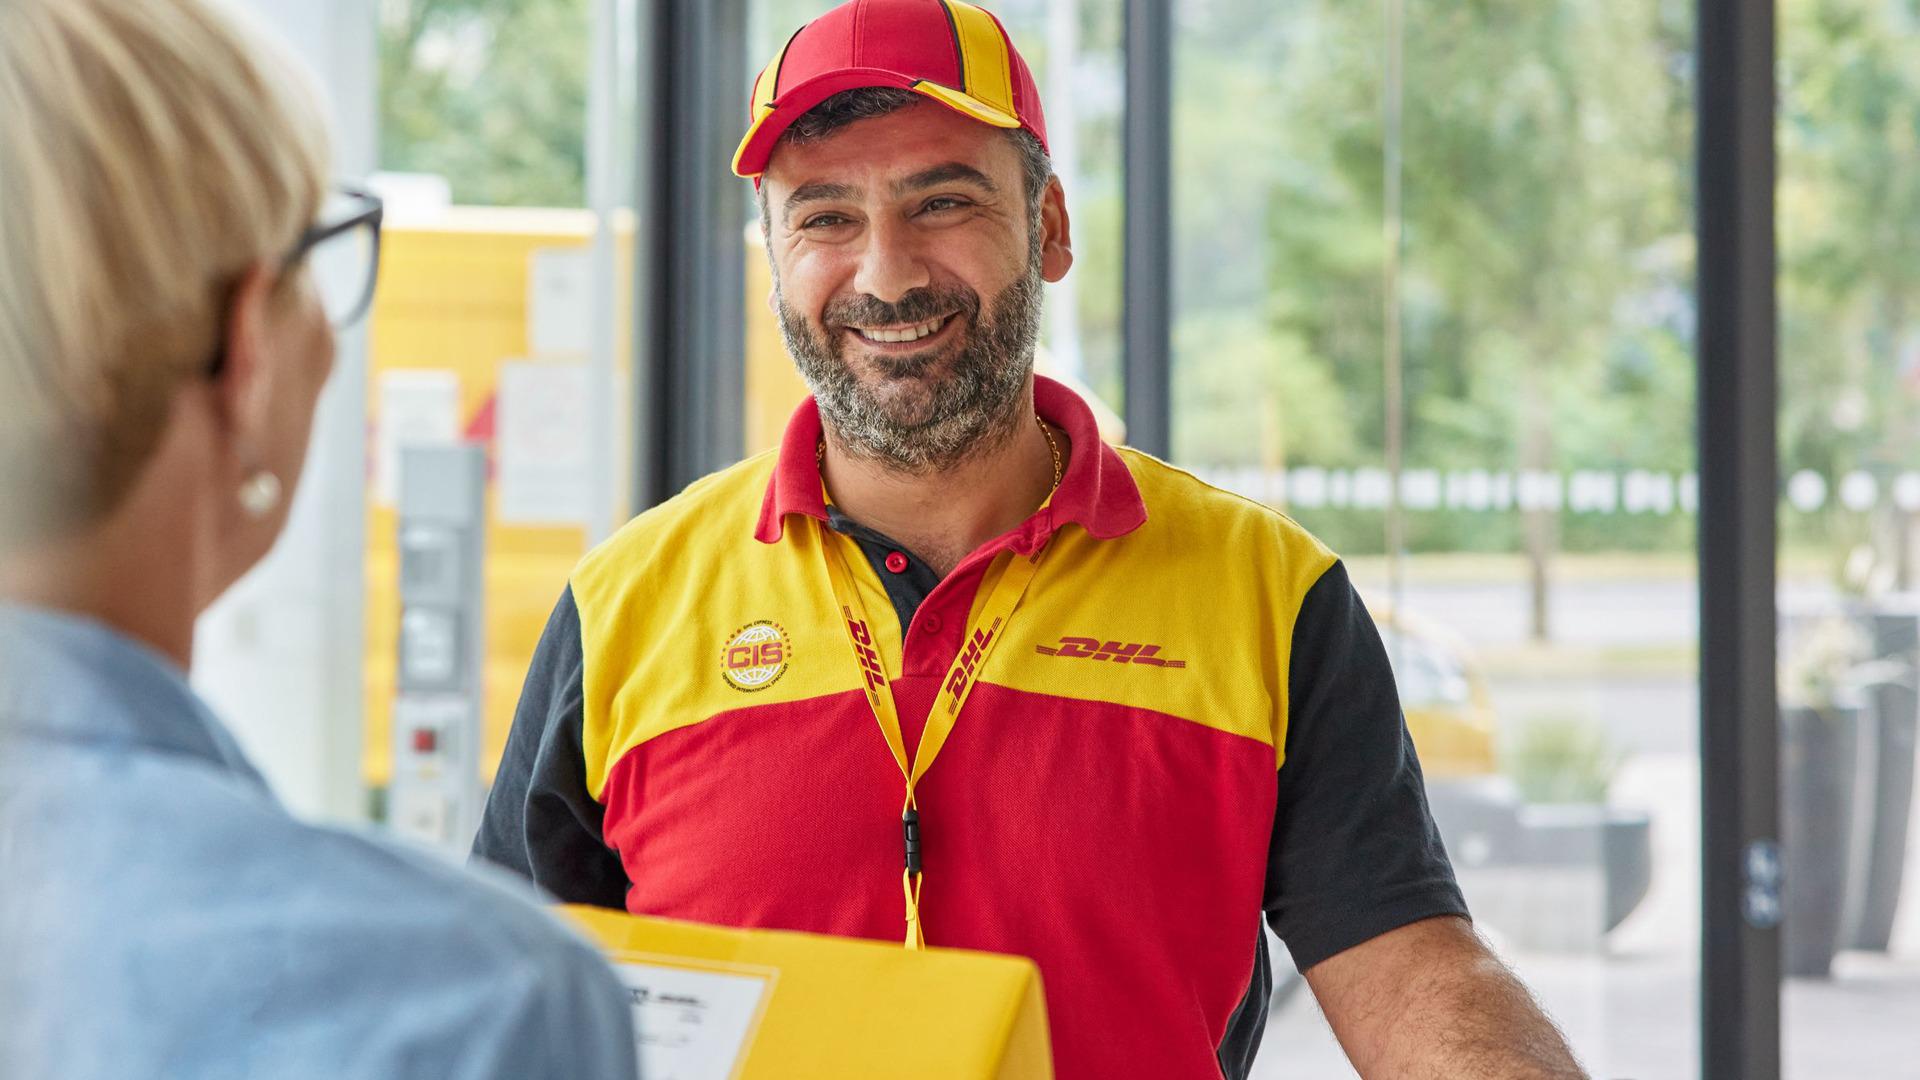 DHL Express Service Point (Ryman Old Brompton Road)